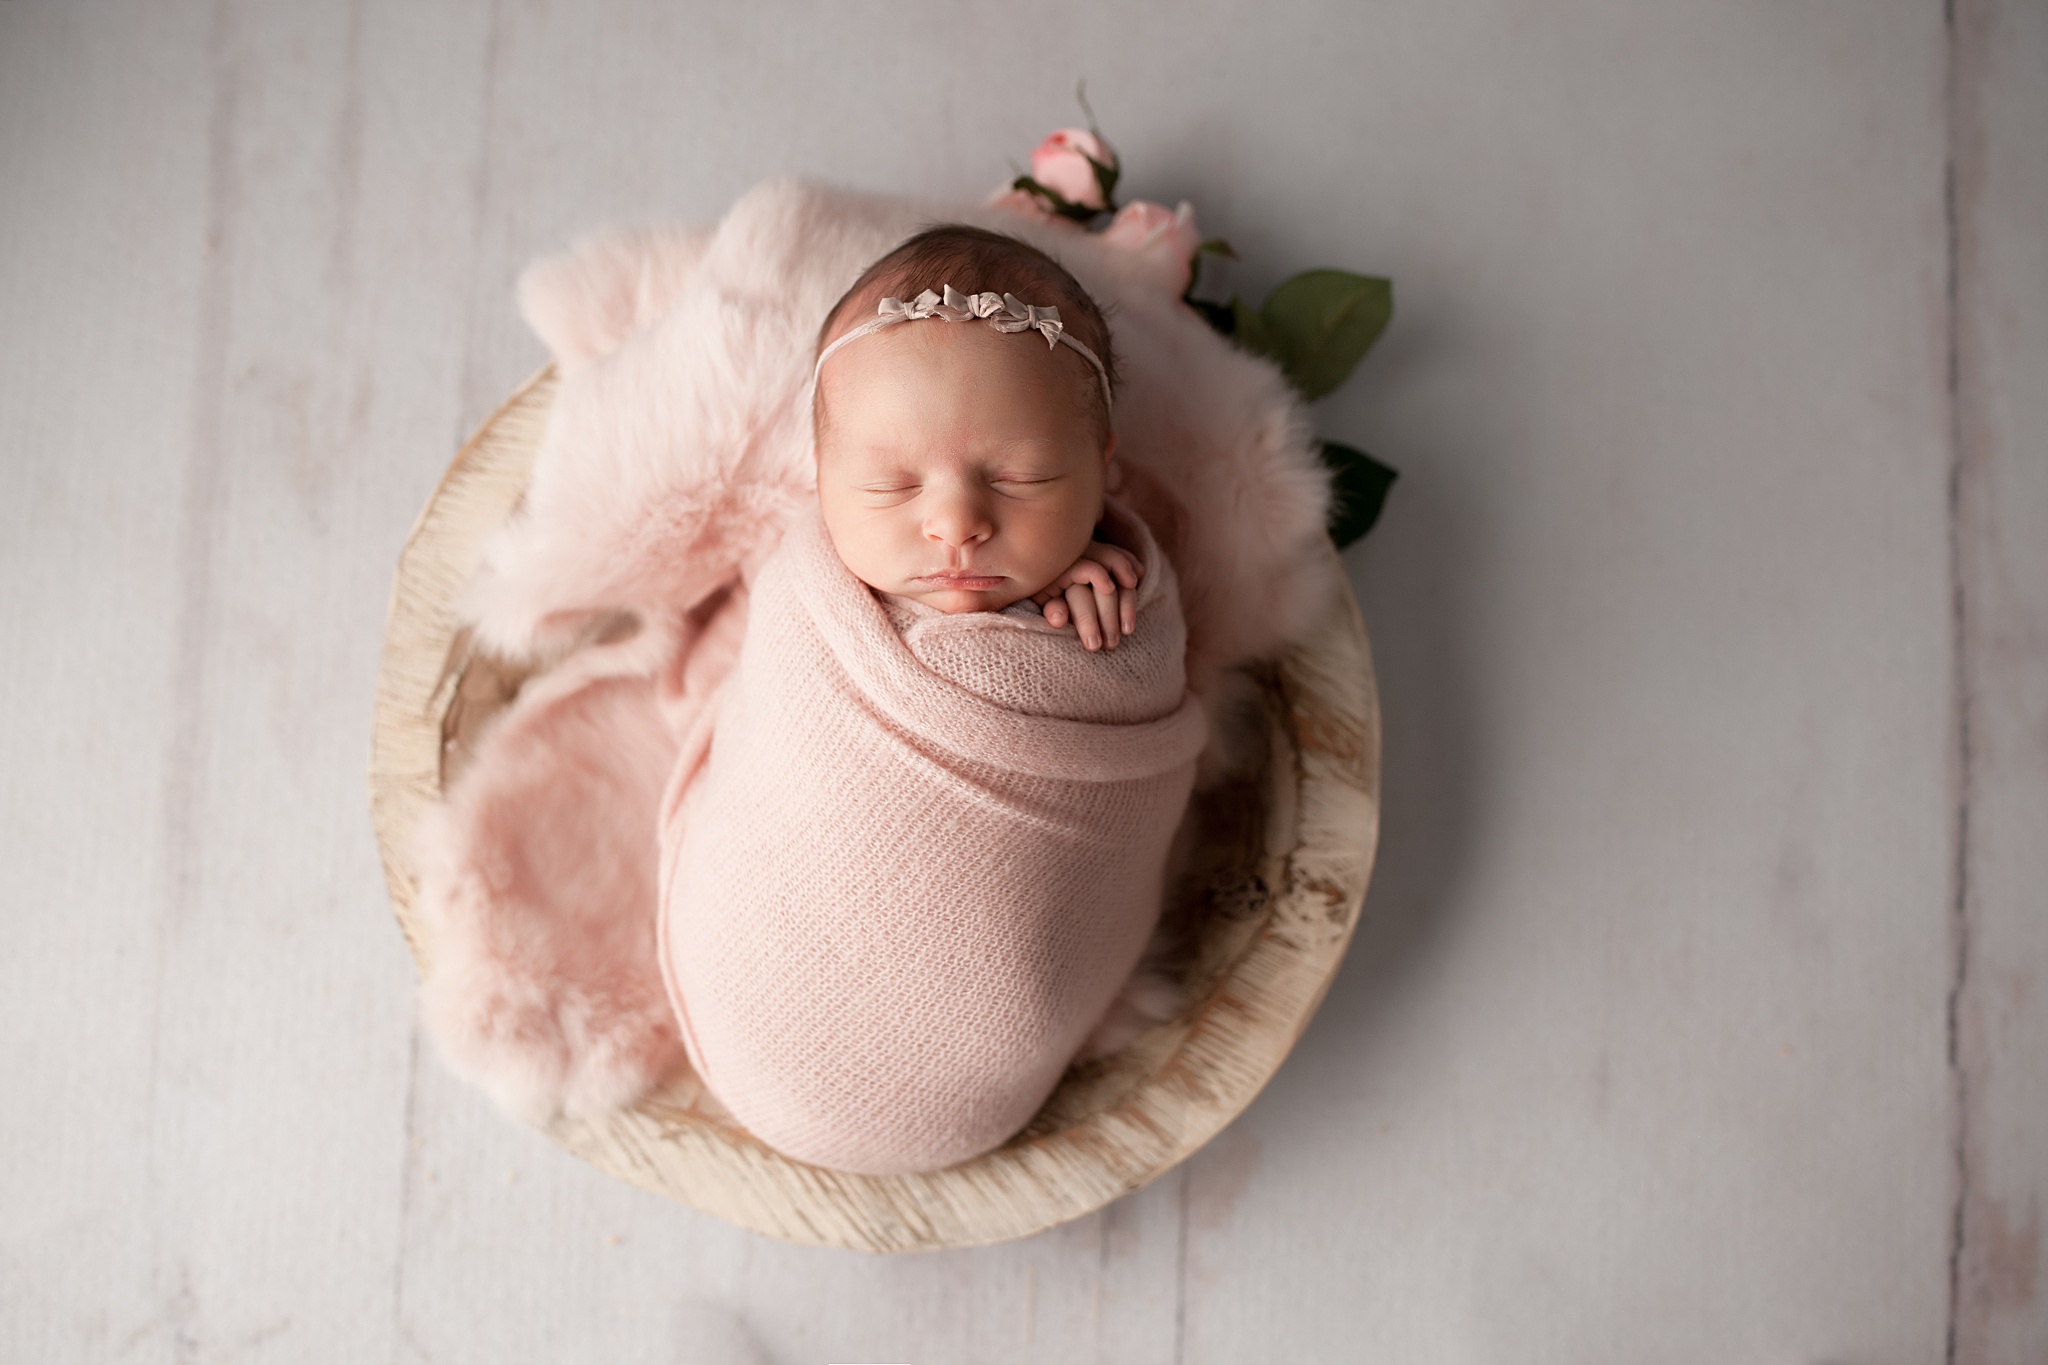 Newborn in a pink swaddle laying in a while basket